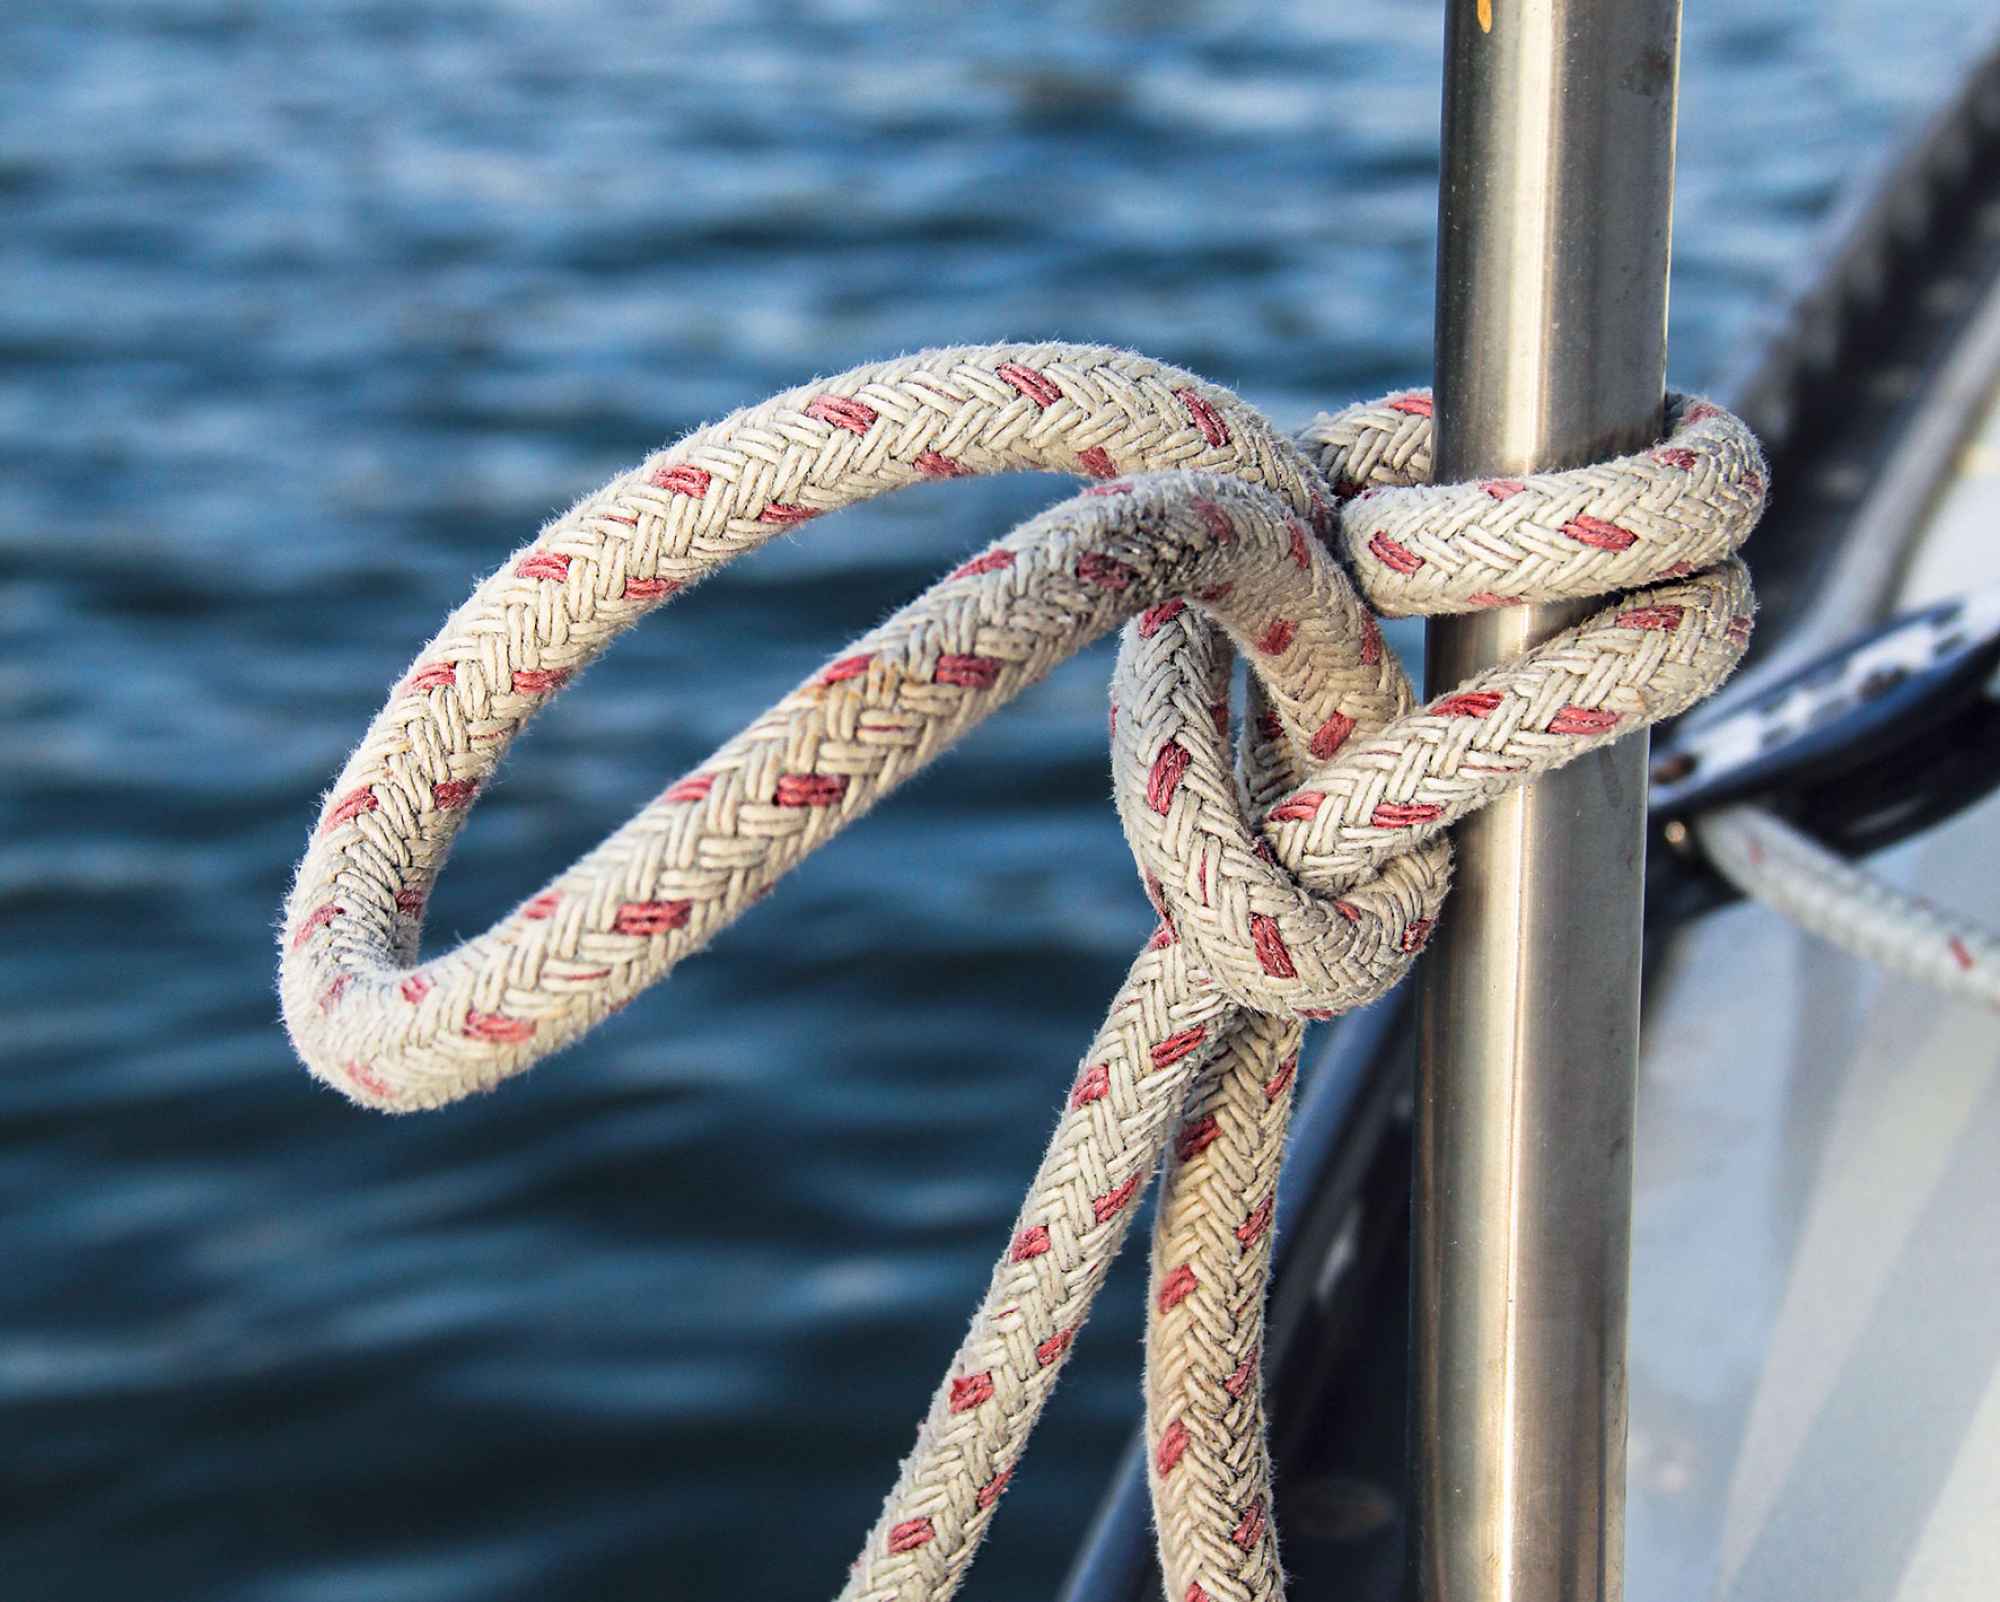 Knot Tying: Learn the Quick Release Trucker's HItch